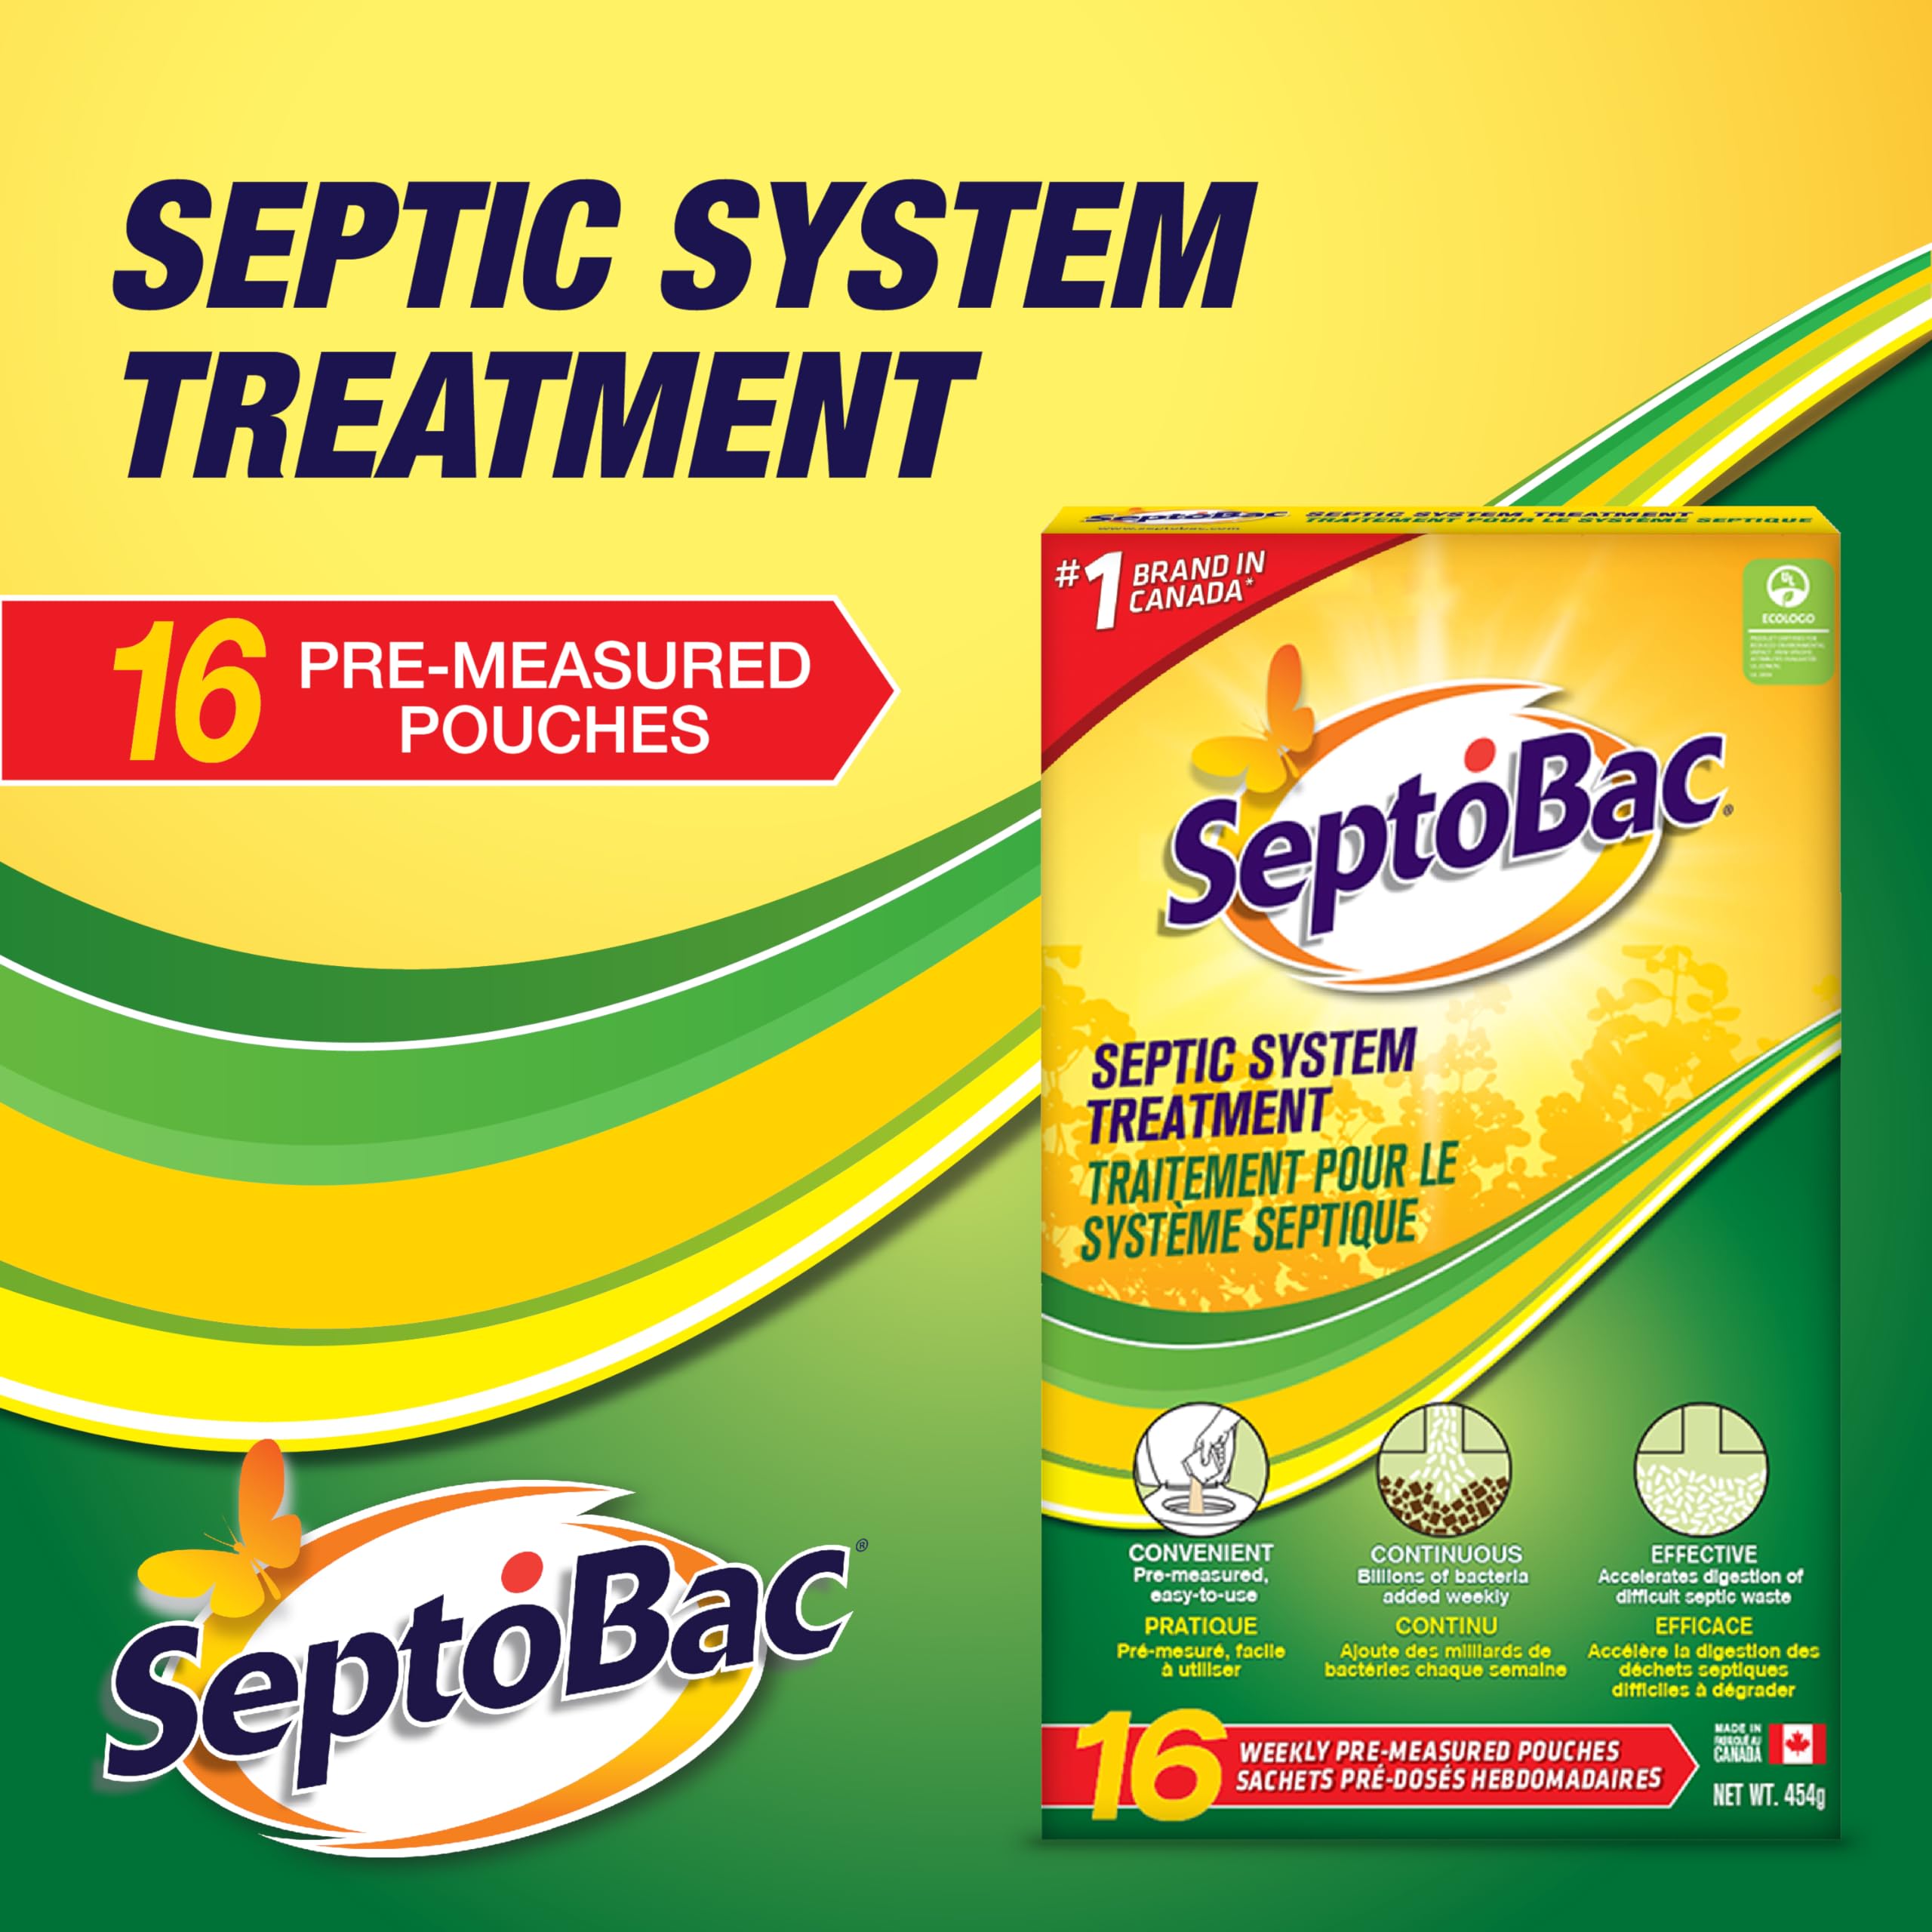 SeptoBac Septic System Treatment Maintenance, Pre-Measured Weekly Pouches for Sewage Waste Tank in Homes, RVs, Boats, 16 Pack